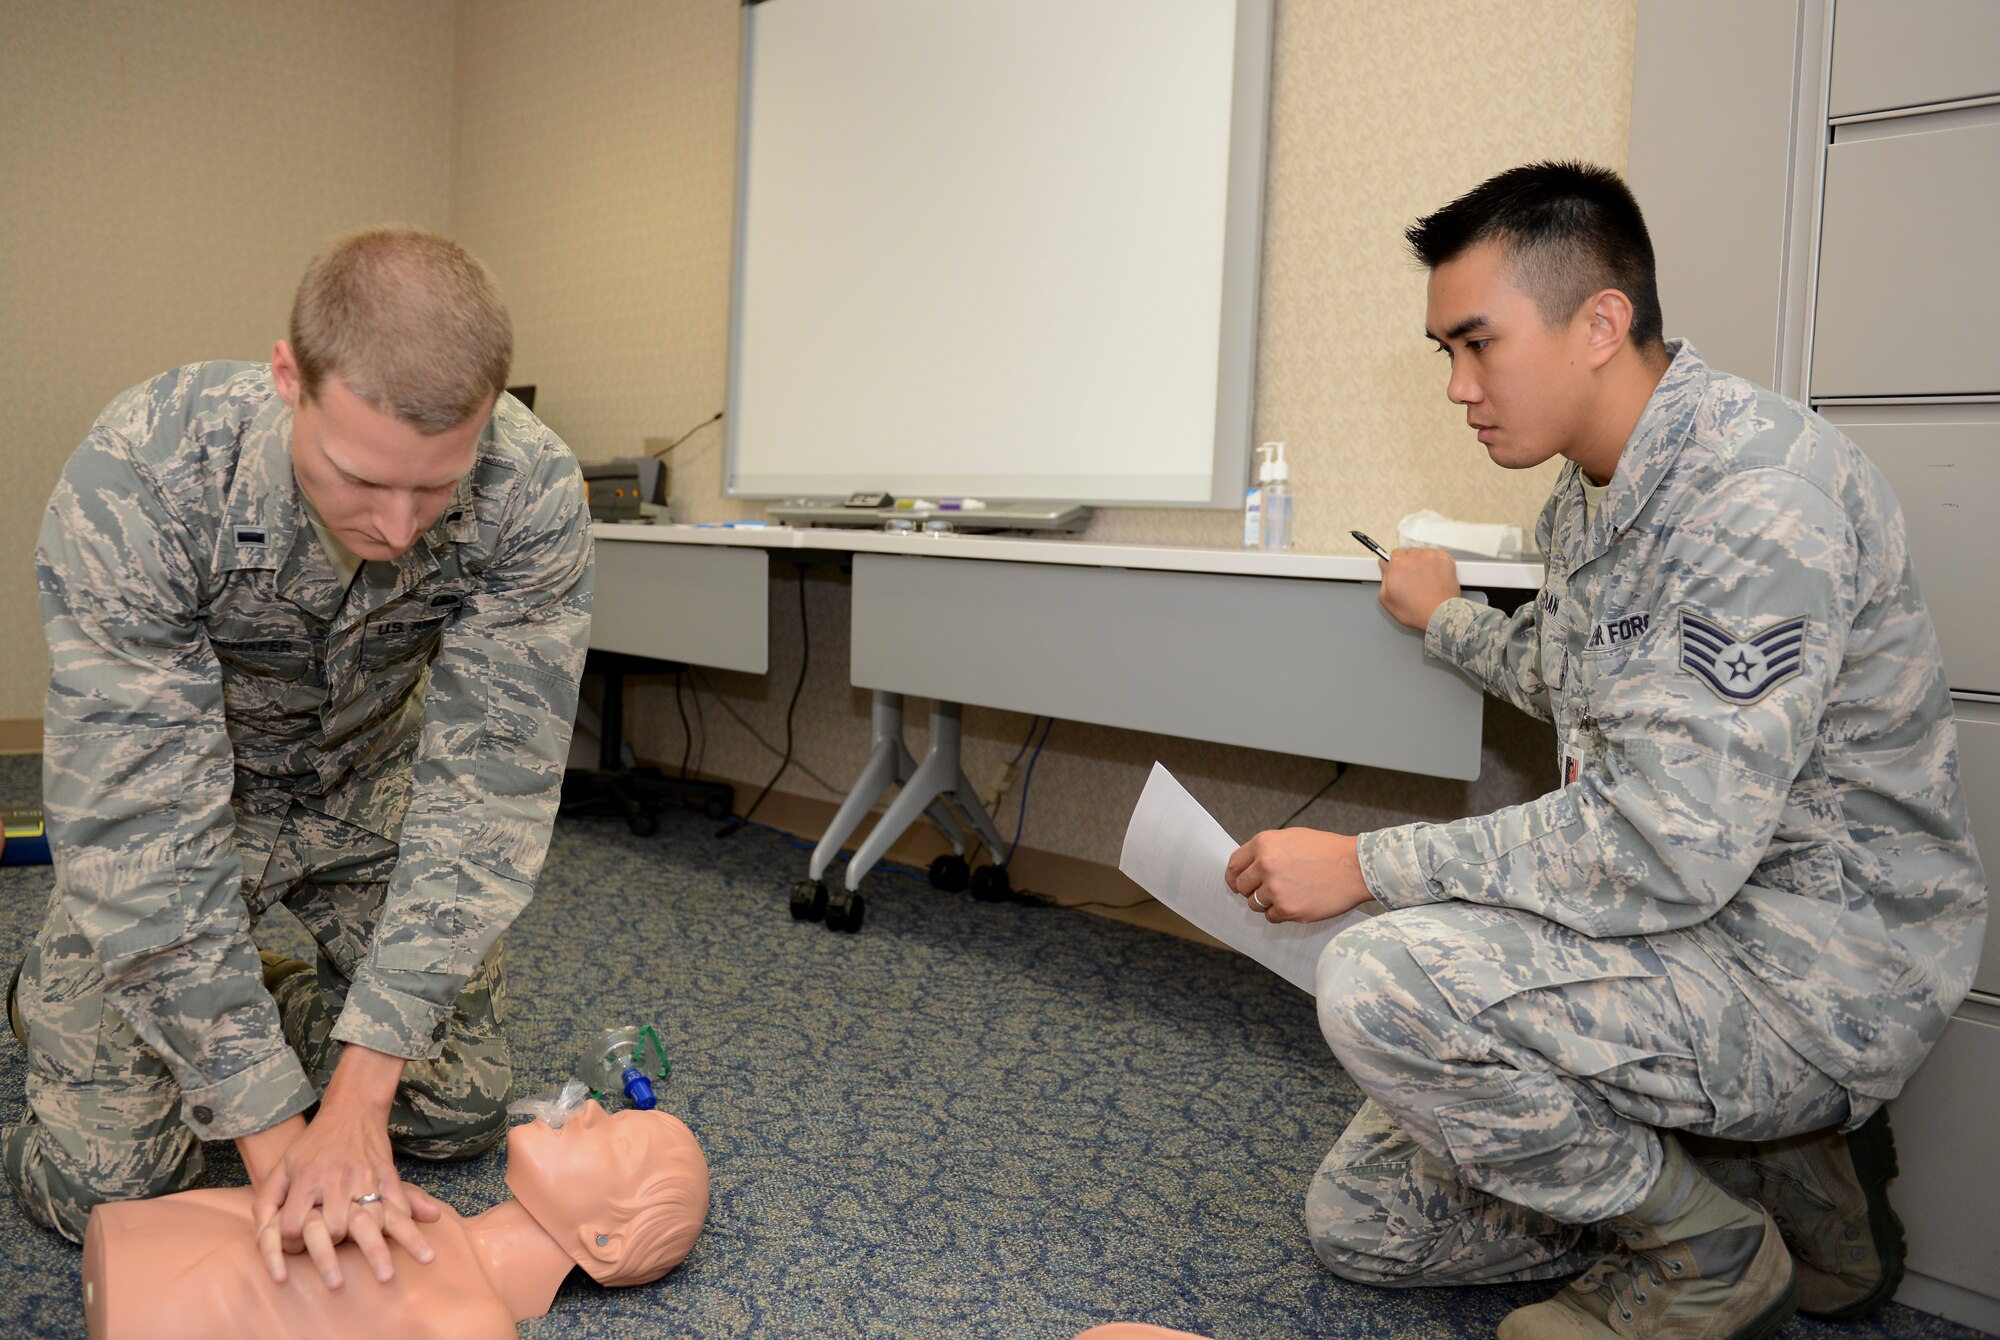 1st Lt. Corey Rotschaffer, 36th Wing Staff Agency assistant staff judge advocate, administers chest compressions during a Heartsaver CPR training course June 12, 2015, at Andersen Air Force Base, Guam. The 36th Medical Group education and training section offers courses to provide the most accurate and up-to-date lifesaving practices for members. (U.S. Air Force photo by Airman 1st Class Arielle Vasquez/Released)